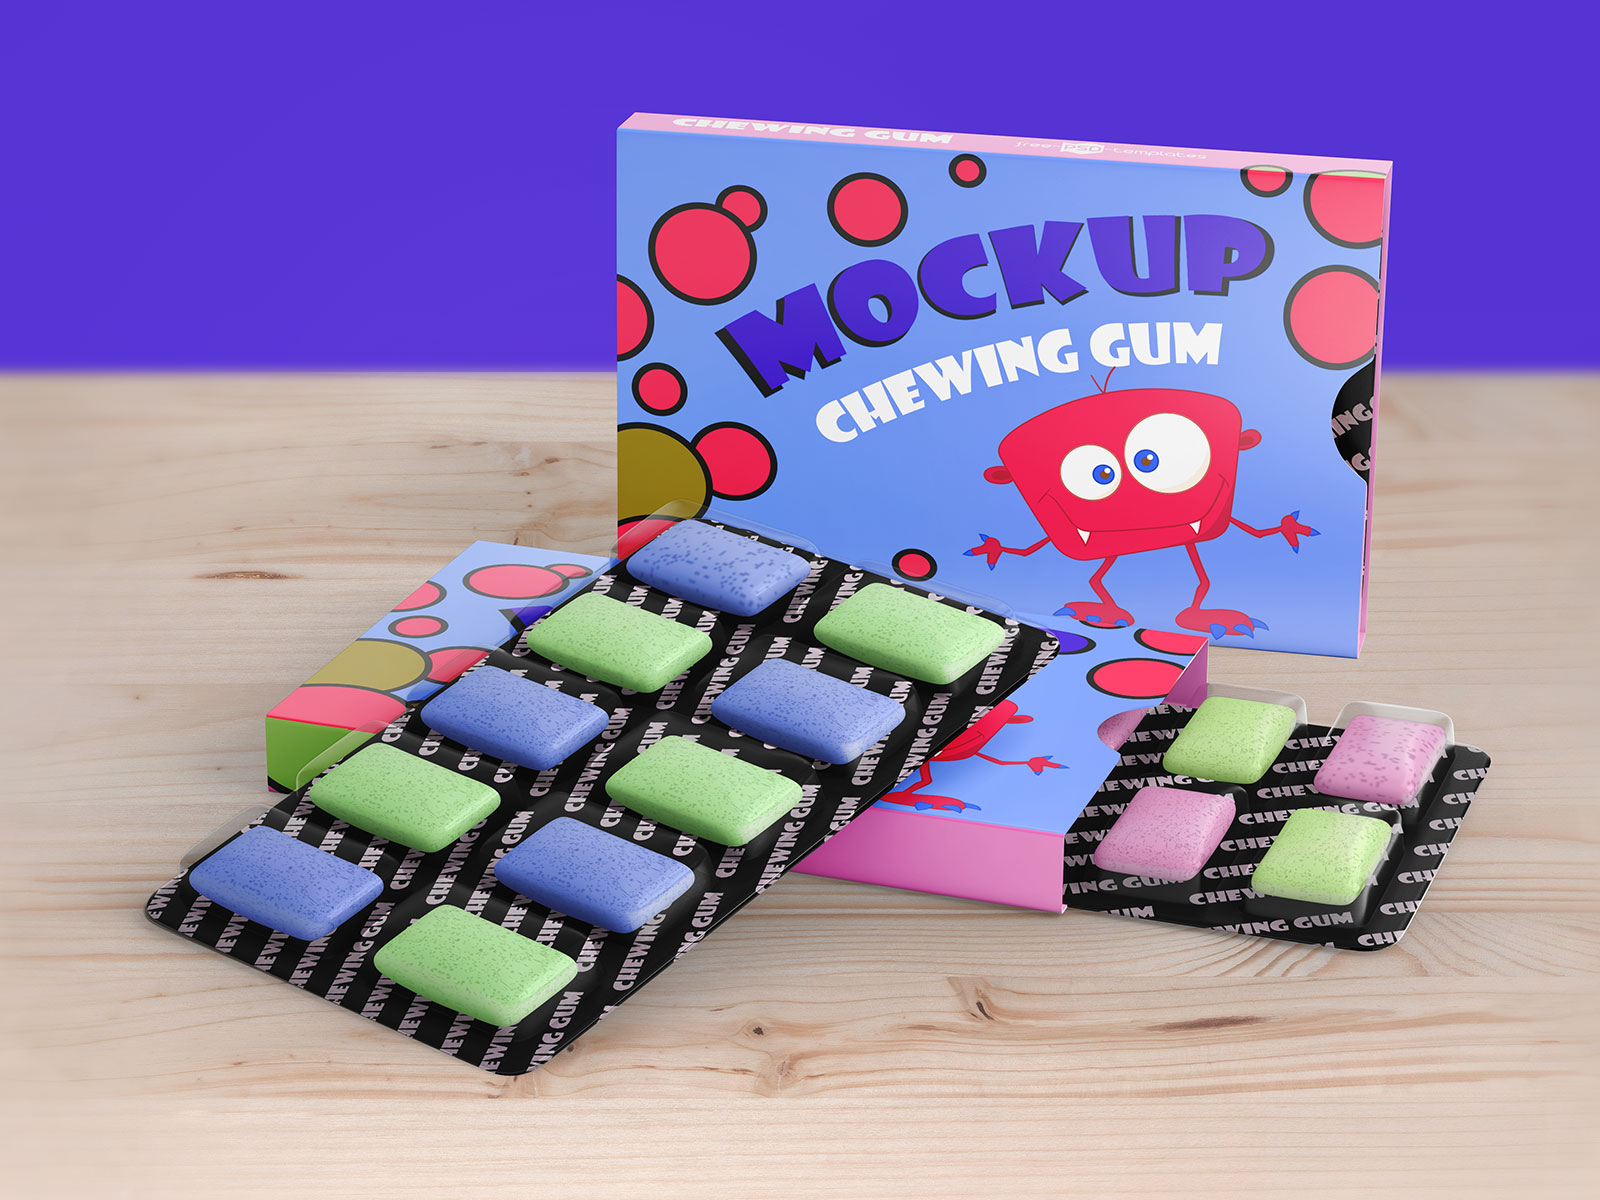 Free Candy-Coated Chewing Gum Blister Packaging Mockup PSD Set (1)